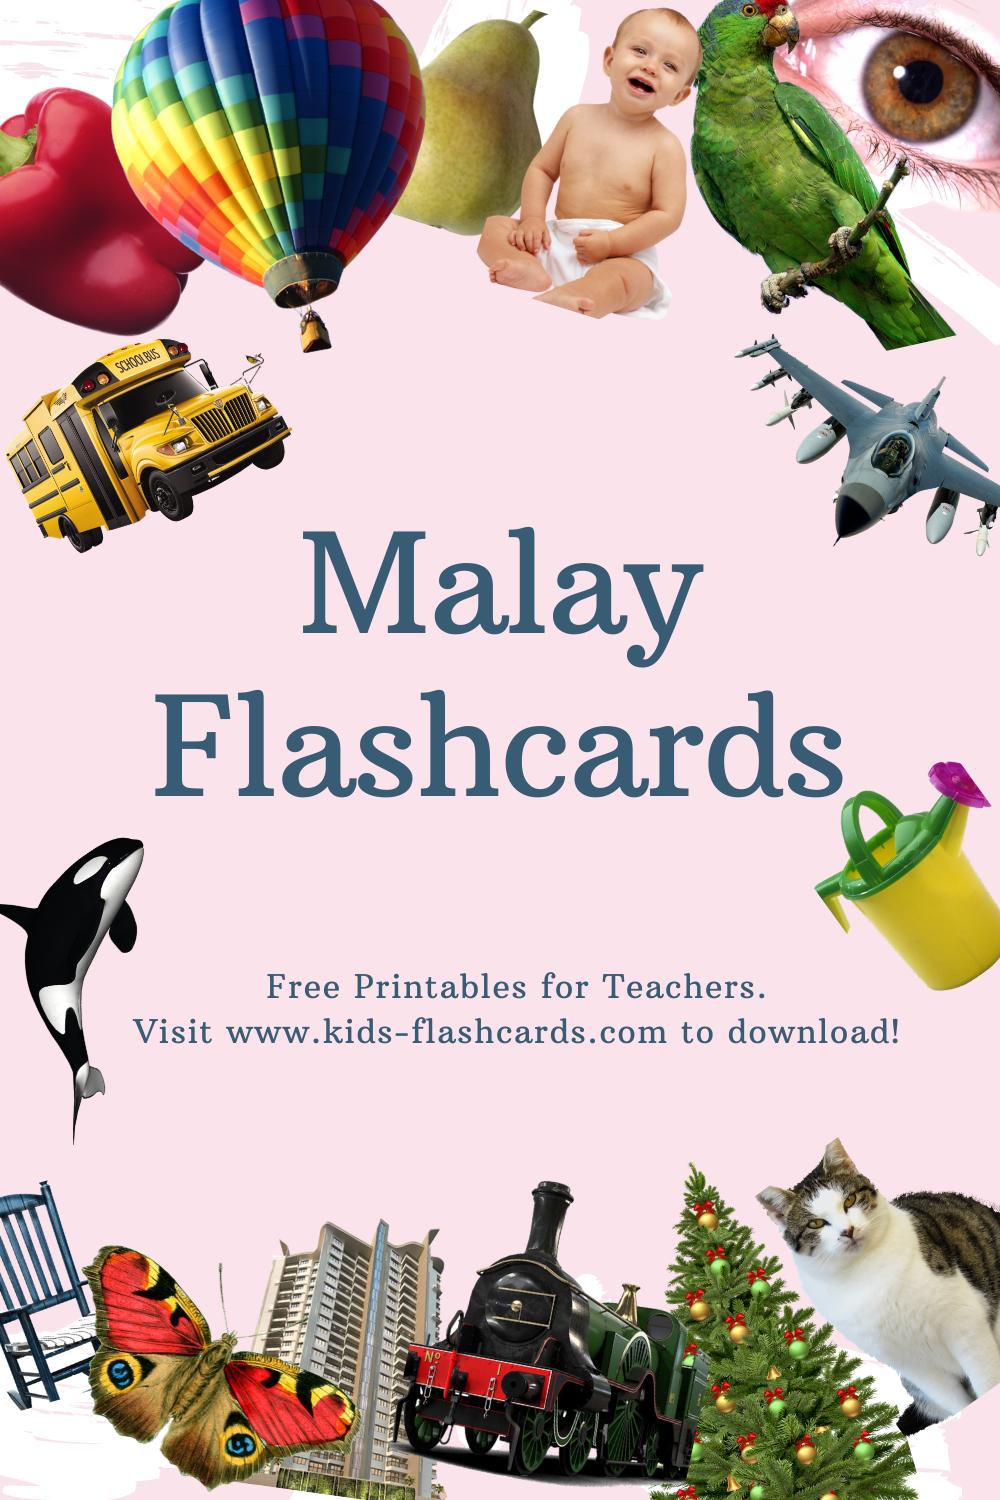 Worksheets to learn Malay language